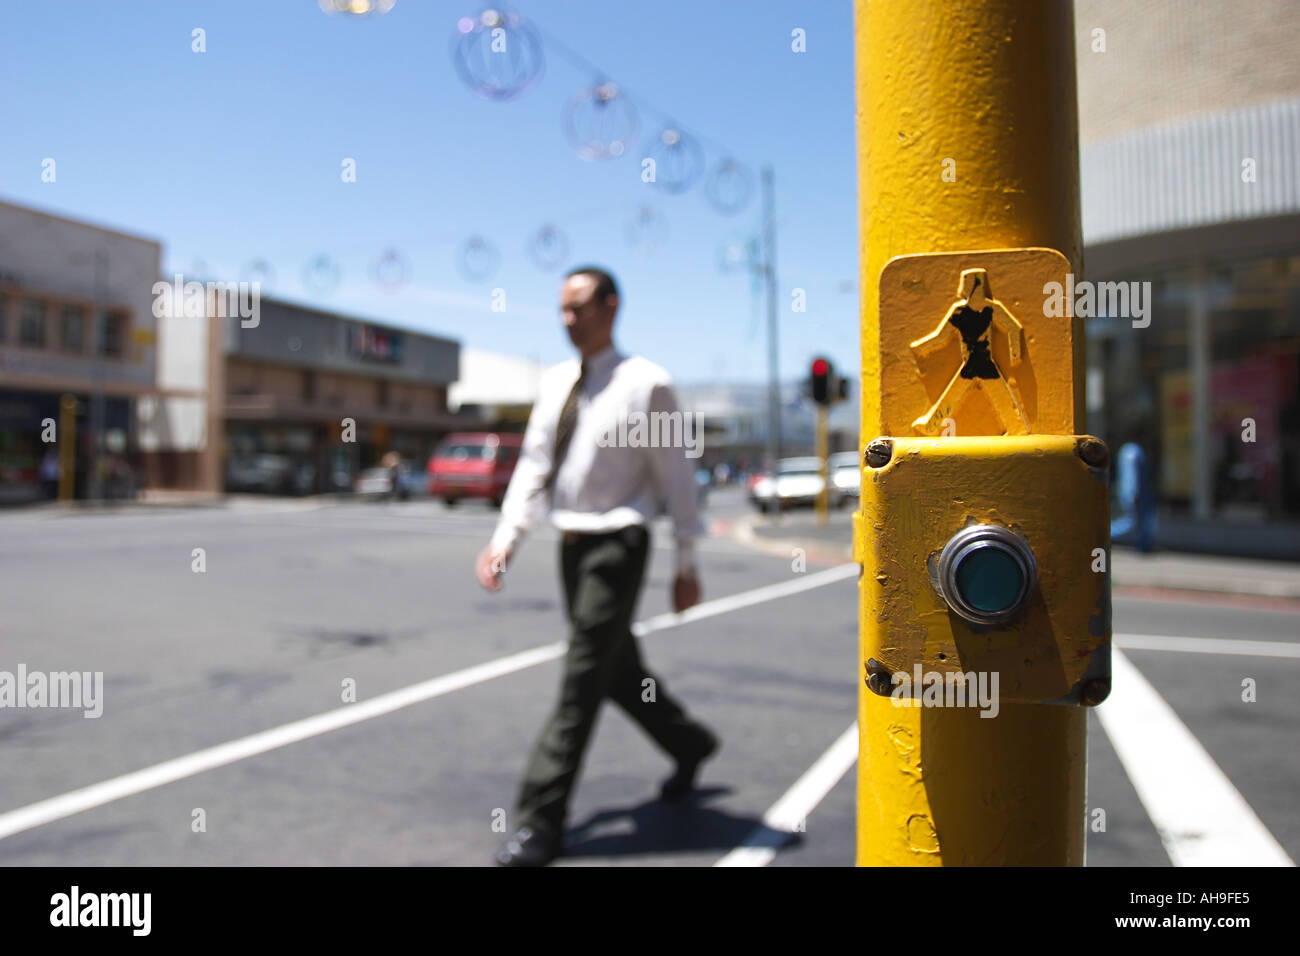 Crosswalk with yellow car stop button and a businessman crossing Paarl South Africa Stock Photo